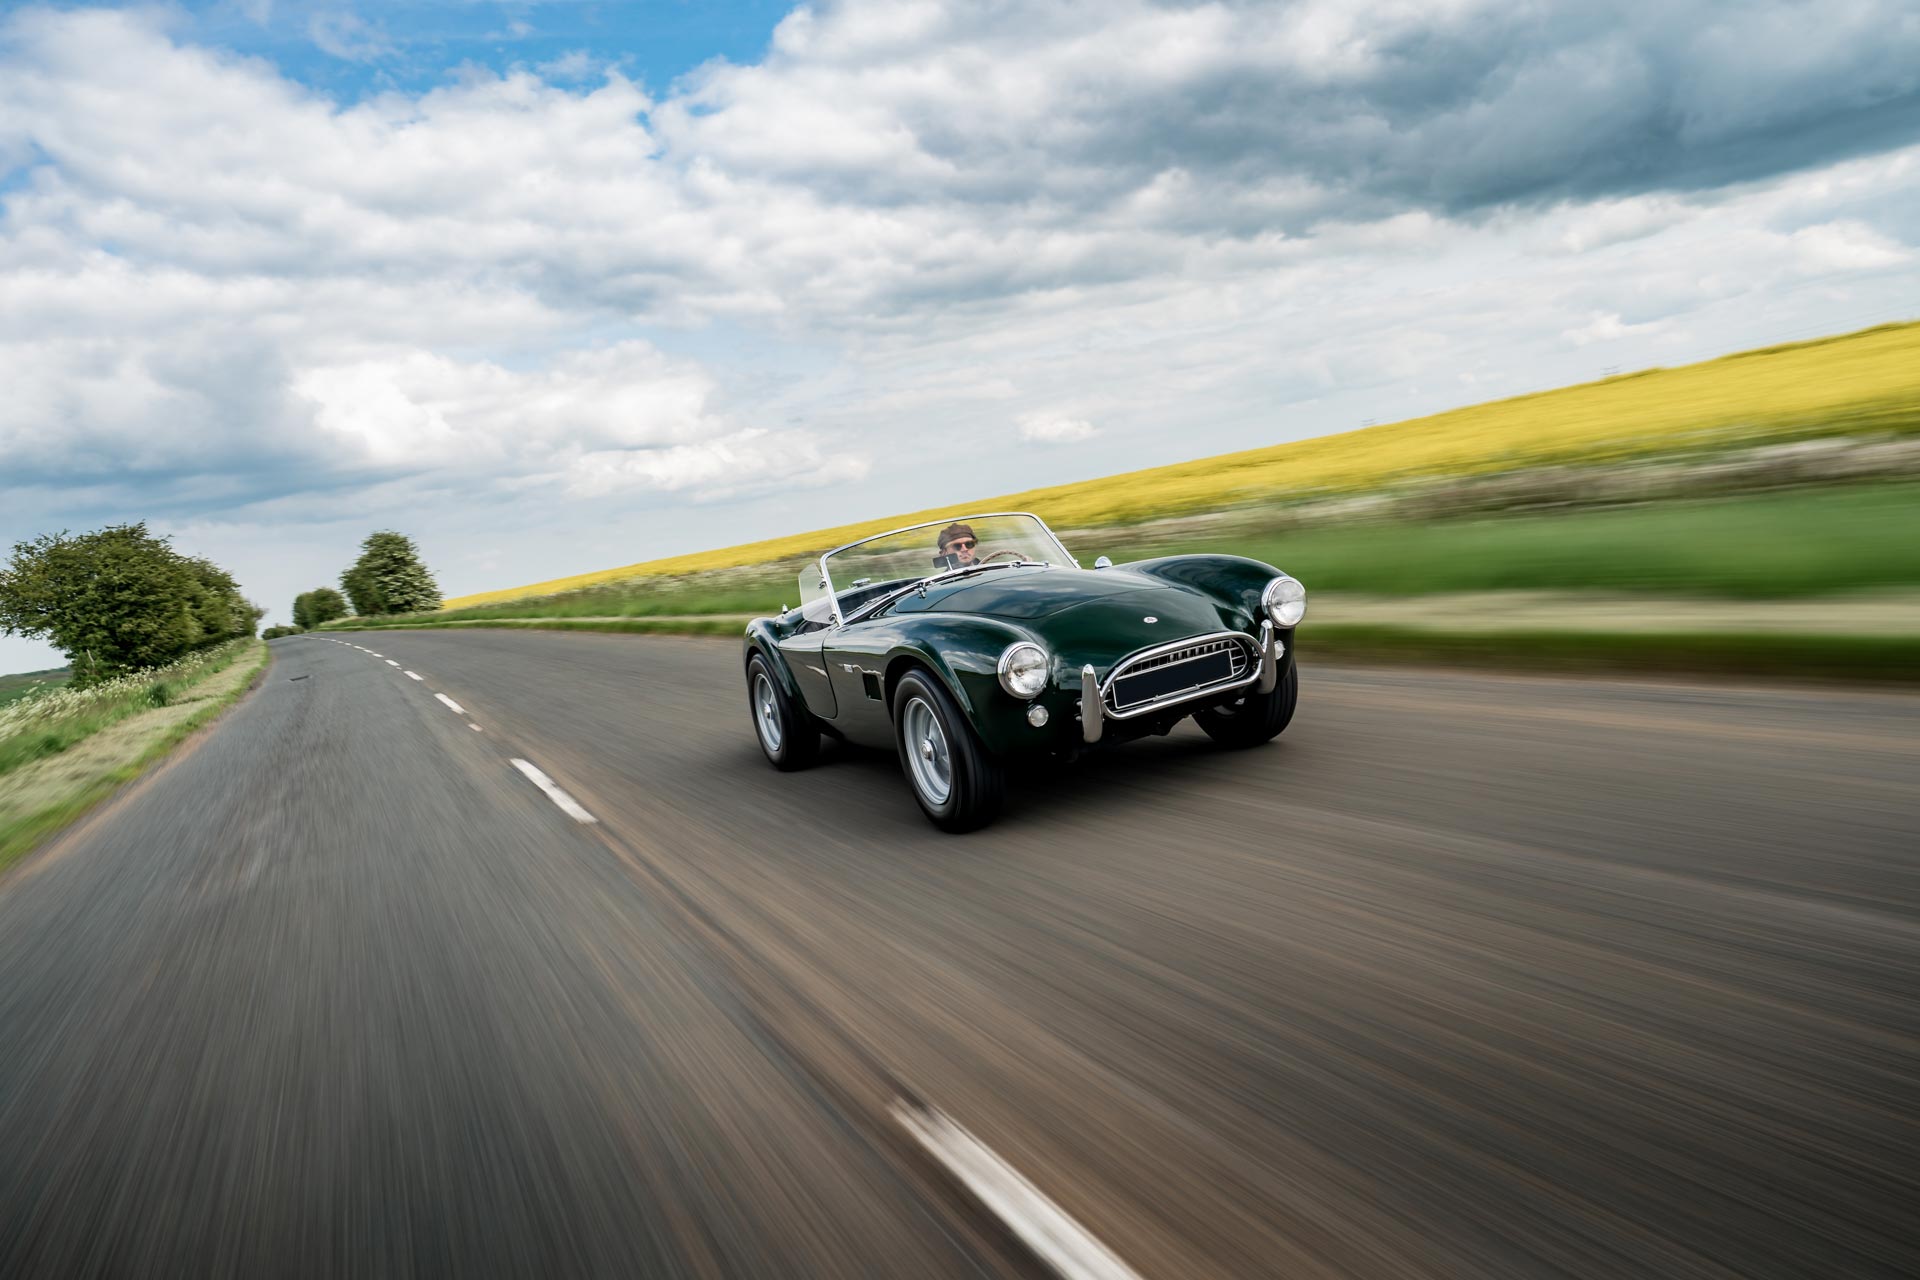 Cobra rolling through The Cotswolds